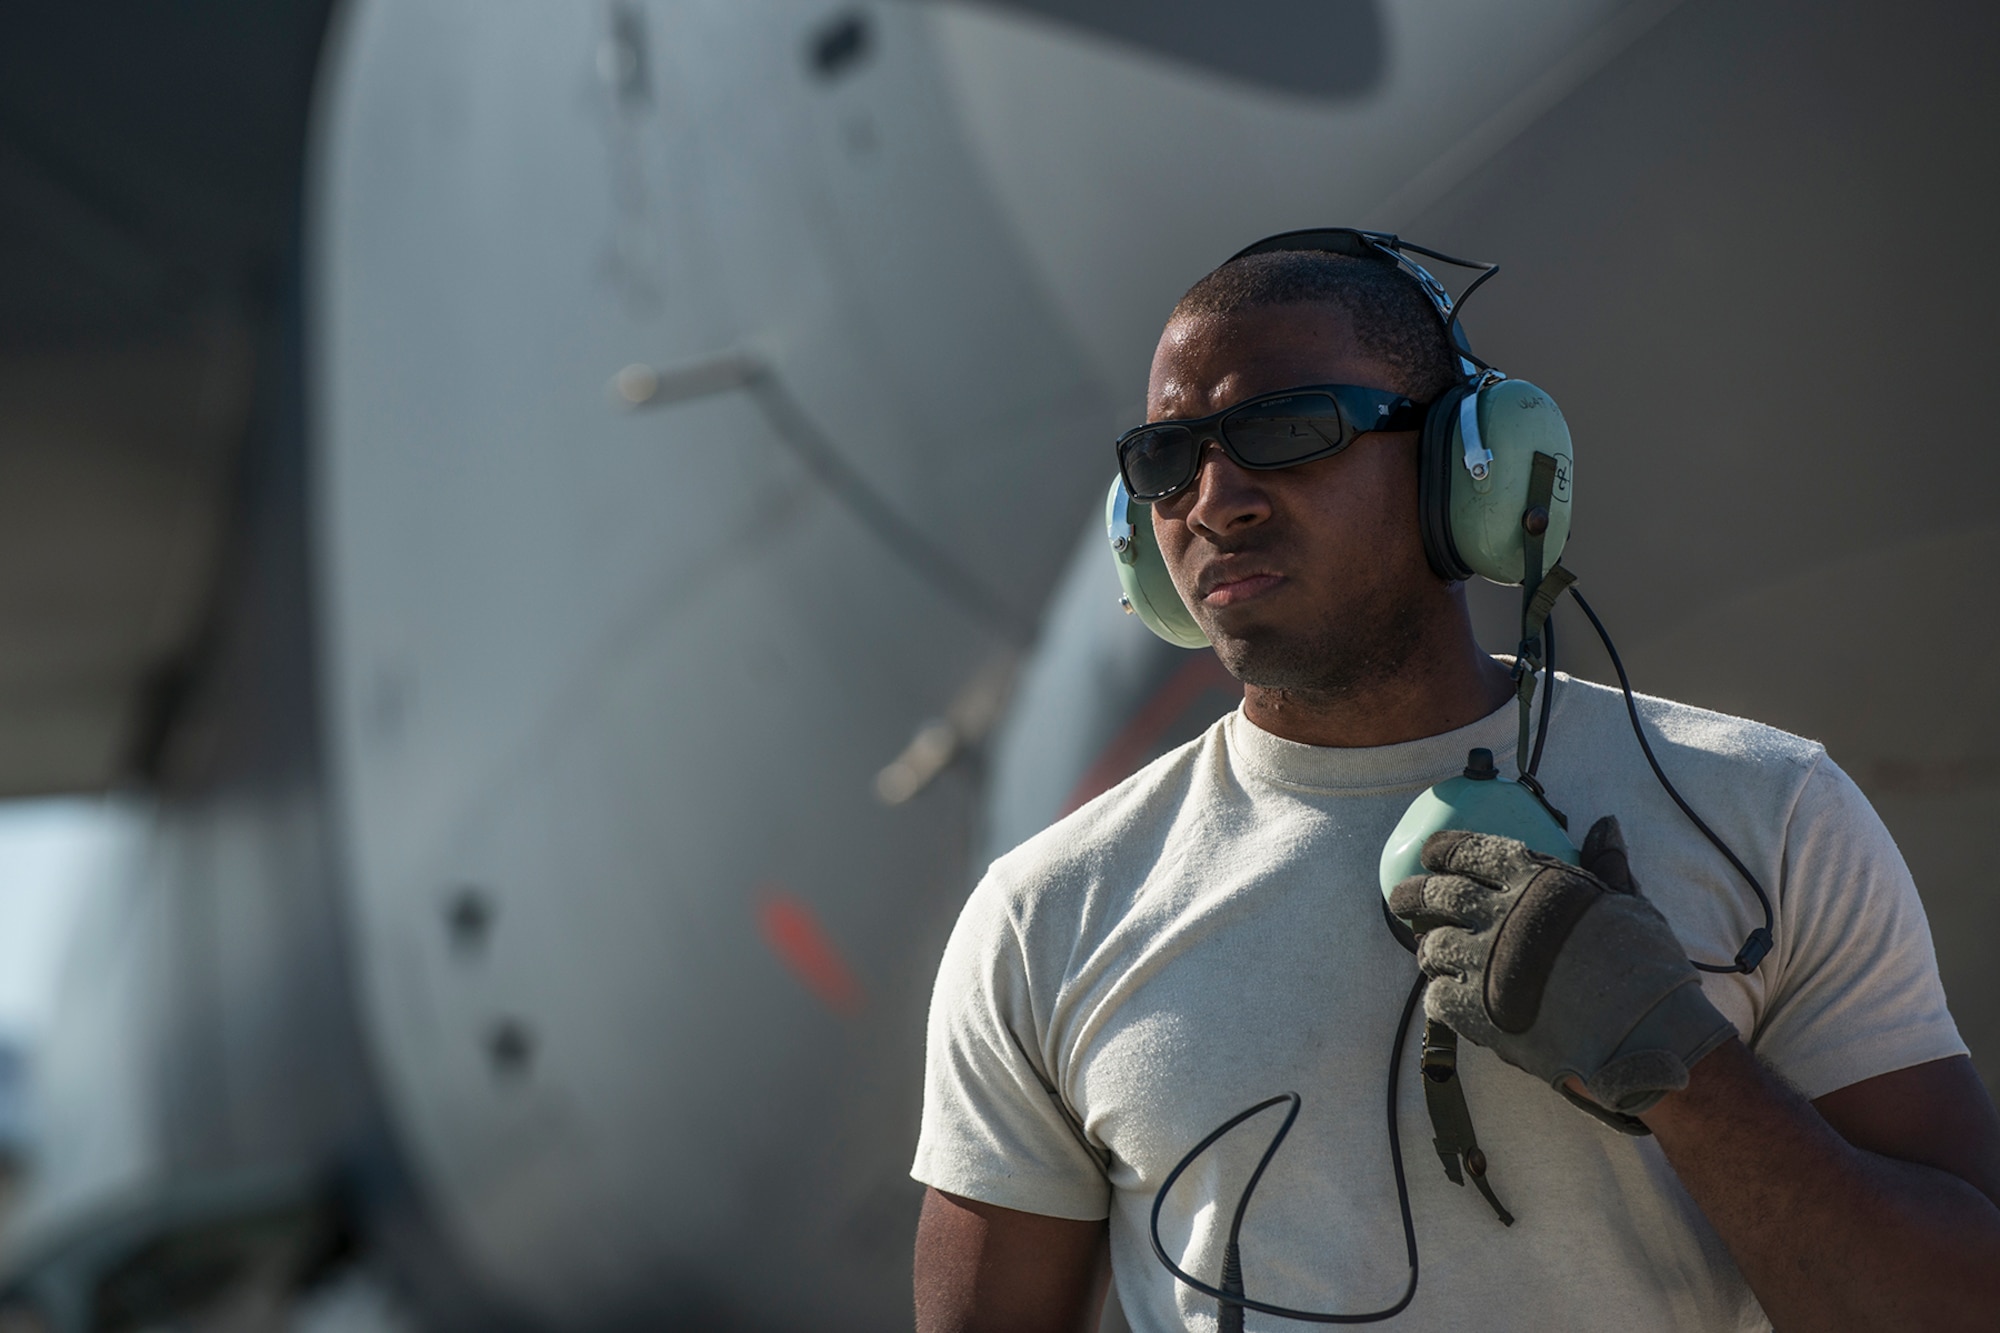 U.S. Air Force Staff Sgt. Lael Isaac, a 307th Aircraft Maintenance Squadron crew chief, listens to the aircrew of a B-52H Stratofortress prior to a mission on June 8, 2016, Nellis Air Force Base, Nev. Isaac is among 45 Active Duty and Air Force Reserve maintenance personnel on temporary duty at Nellis in support of the 340th Weapons Squadron. (U.S. Air Force photo by Master Sgt. Greg Steele/Released)